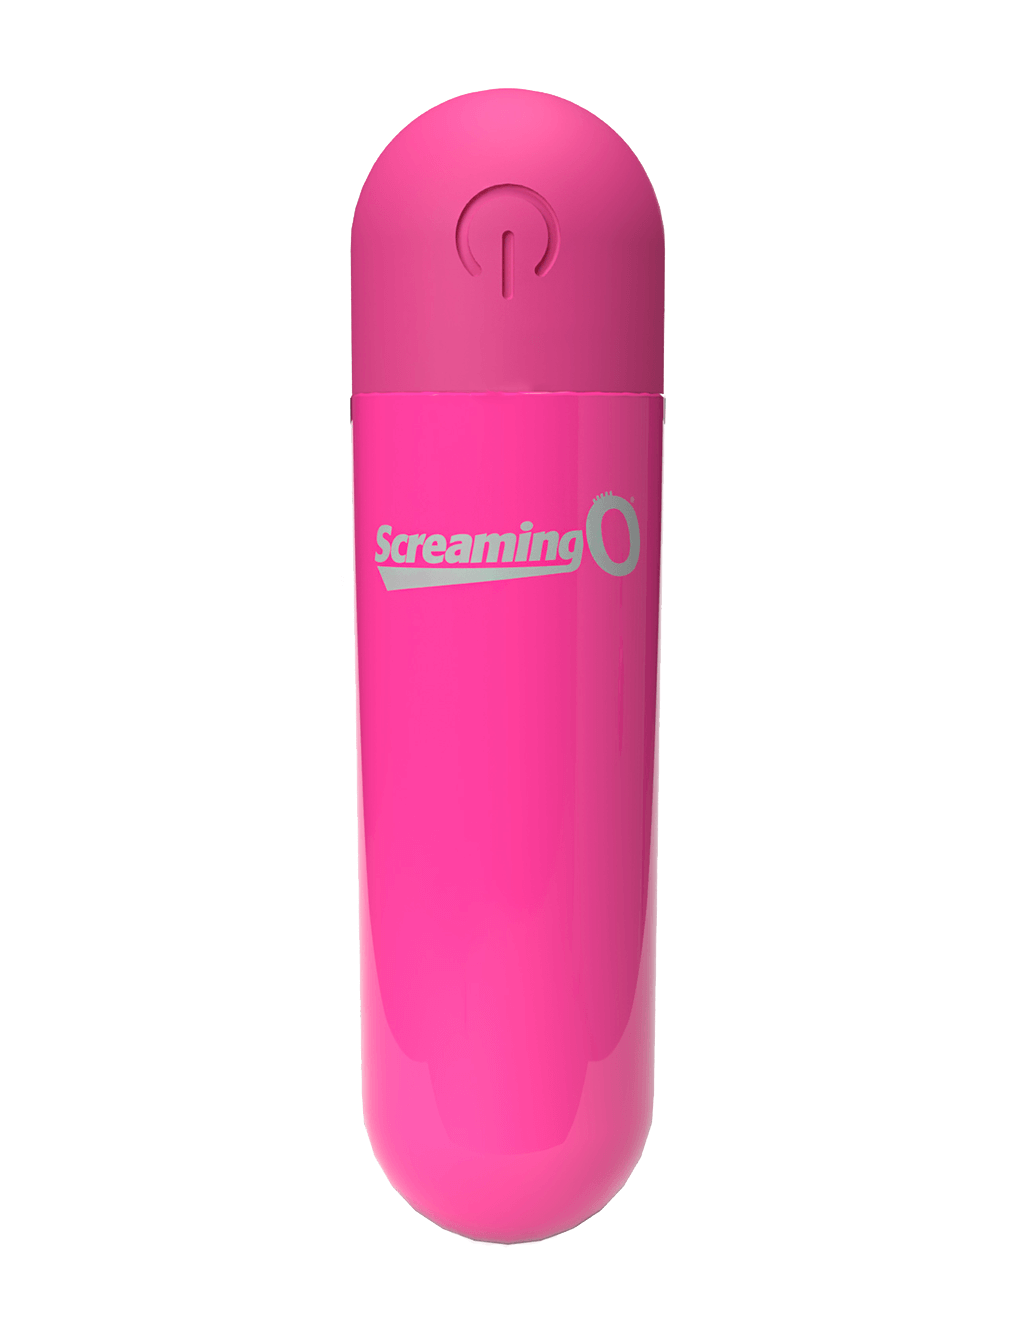 Screaming O Rechargeable Bullet - Pink - Main